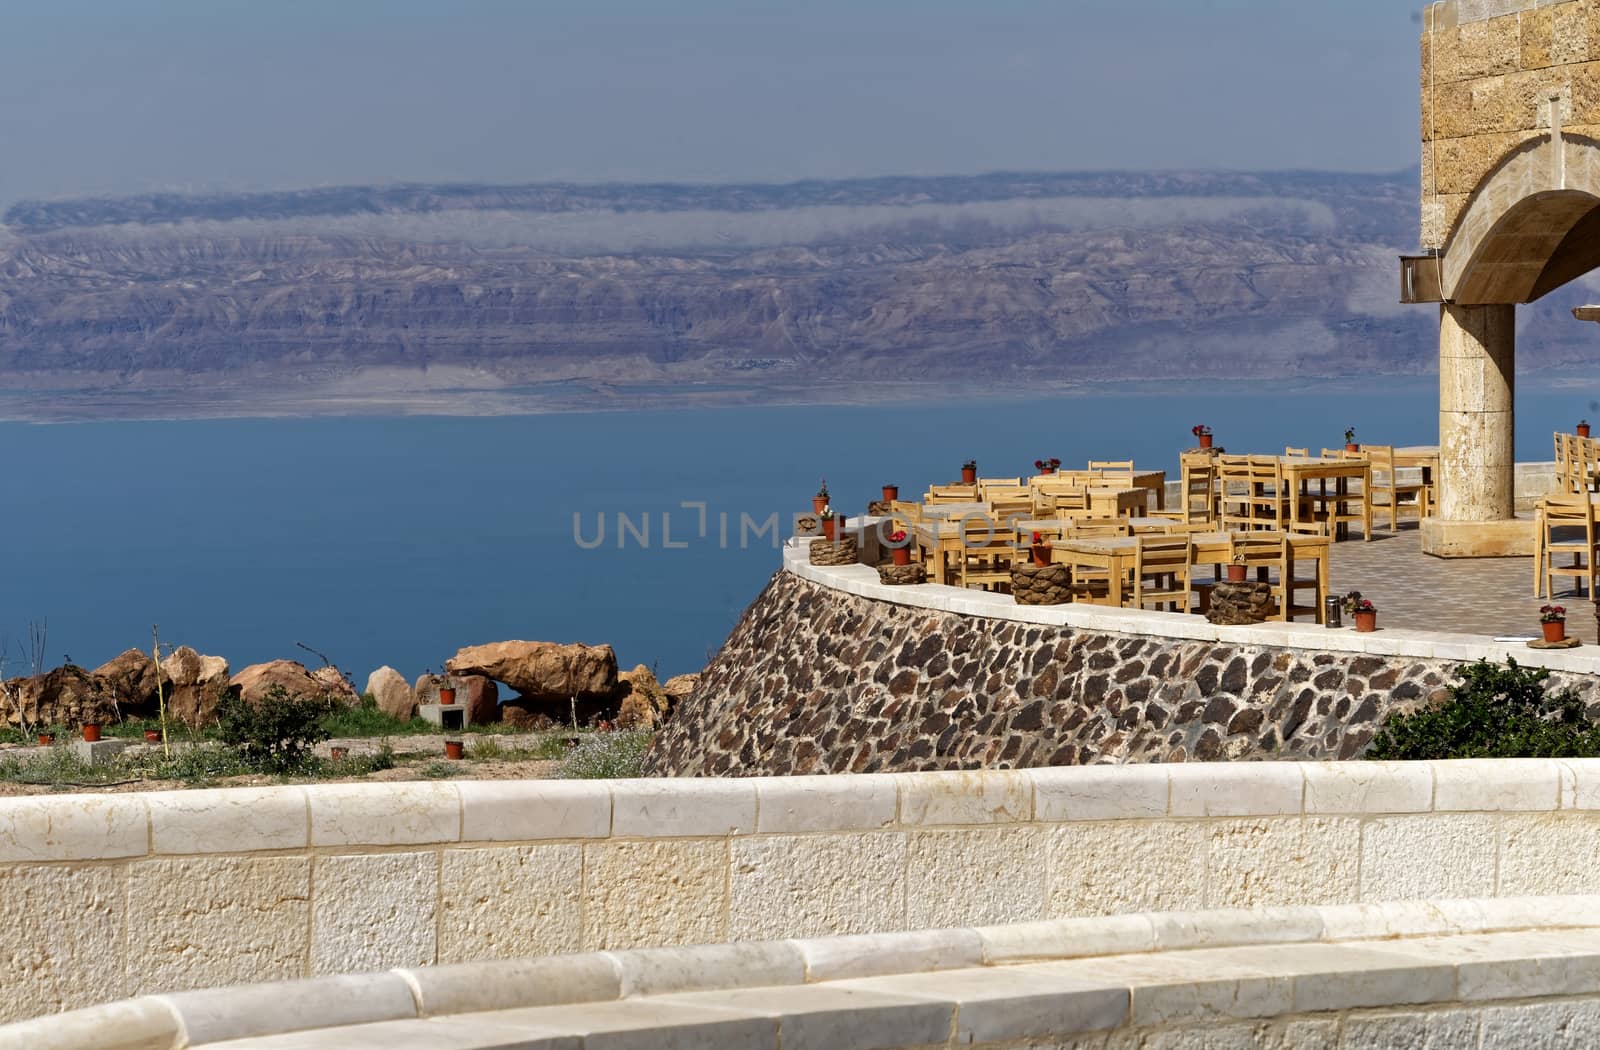 View over the terrace of the museum at the Dead Sea in Jordan with the mountains of Israel on the opposite bank, middle east